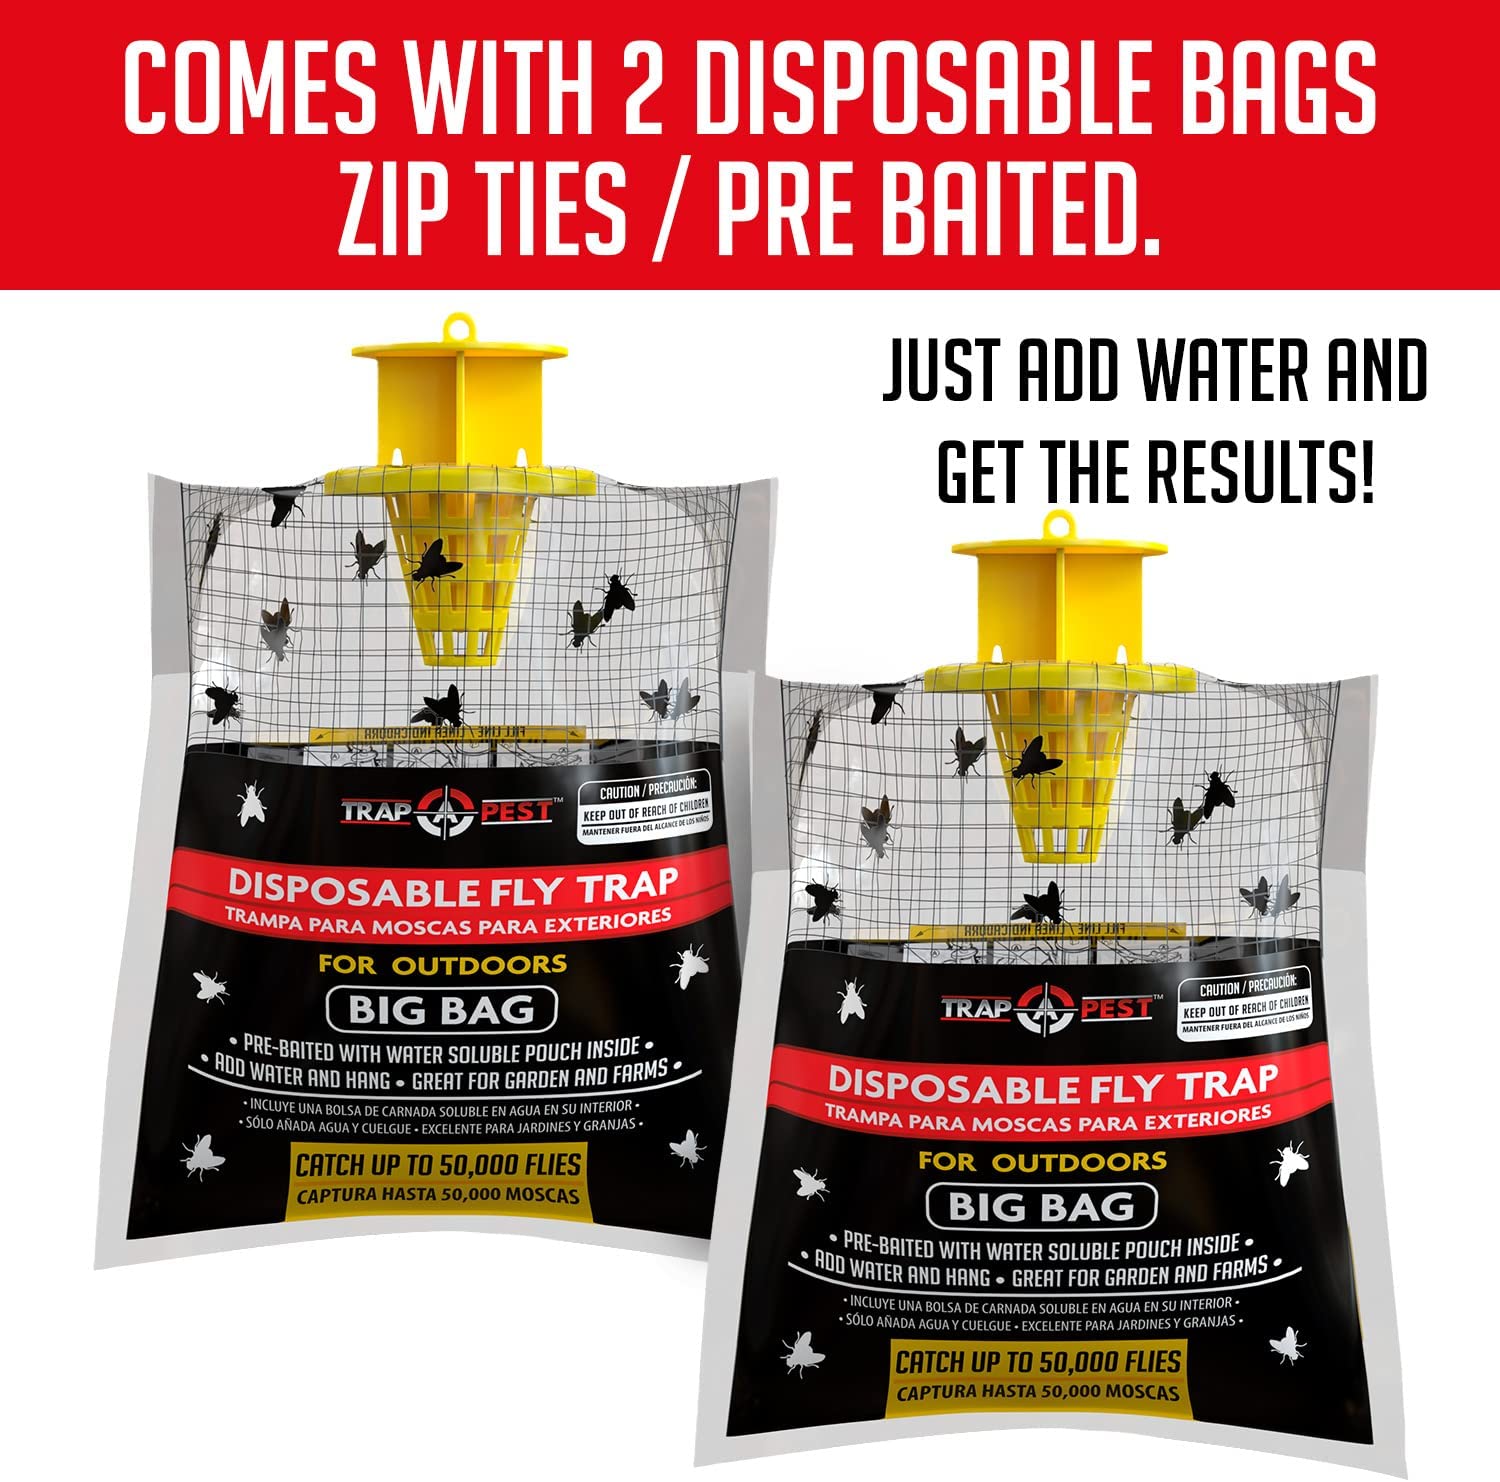 2 Pack Big Bag Fly Bag Trap - Fly Bags Outdoor Disposable Fly Trap Bag -  Fly Trap Disposable Horse Fly Traps Outdoor - Fly Trap Bags Outdoor